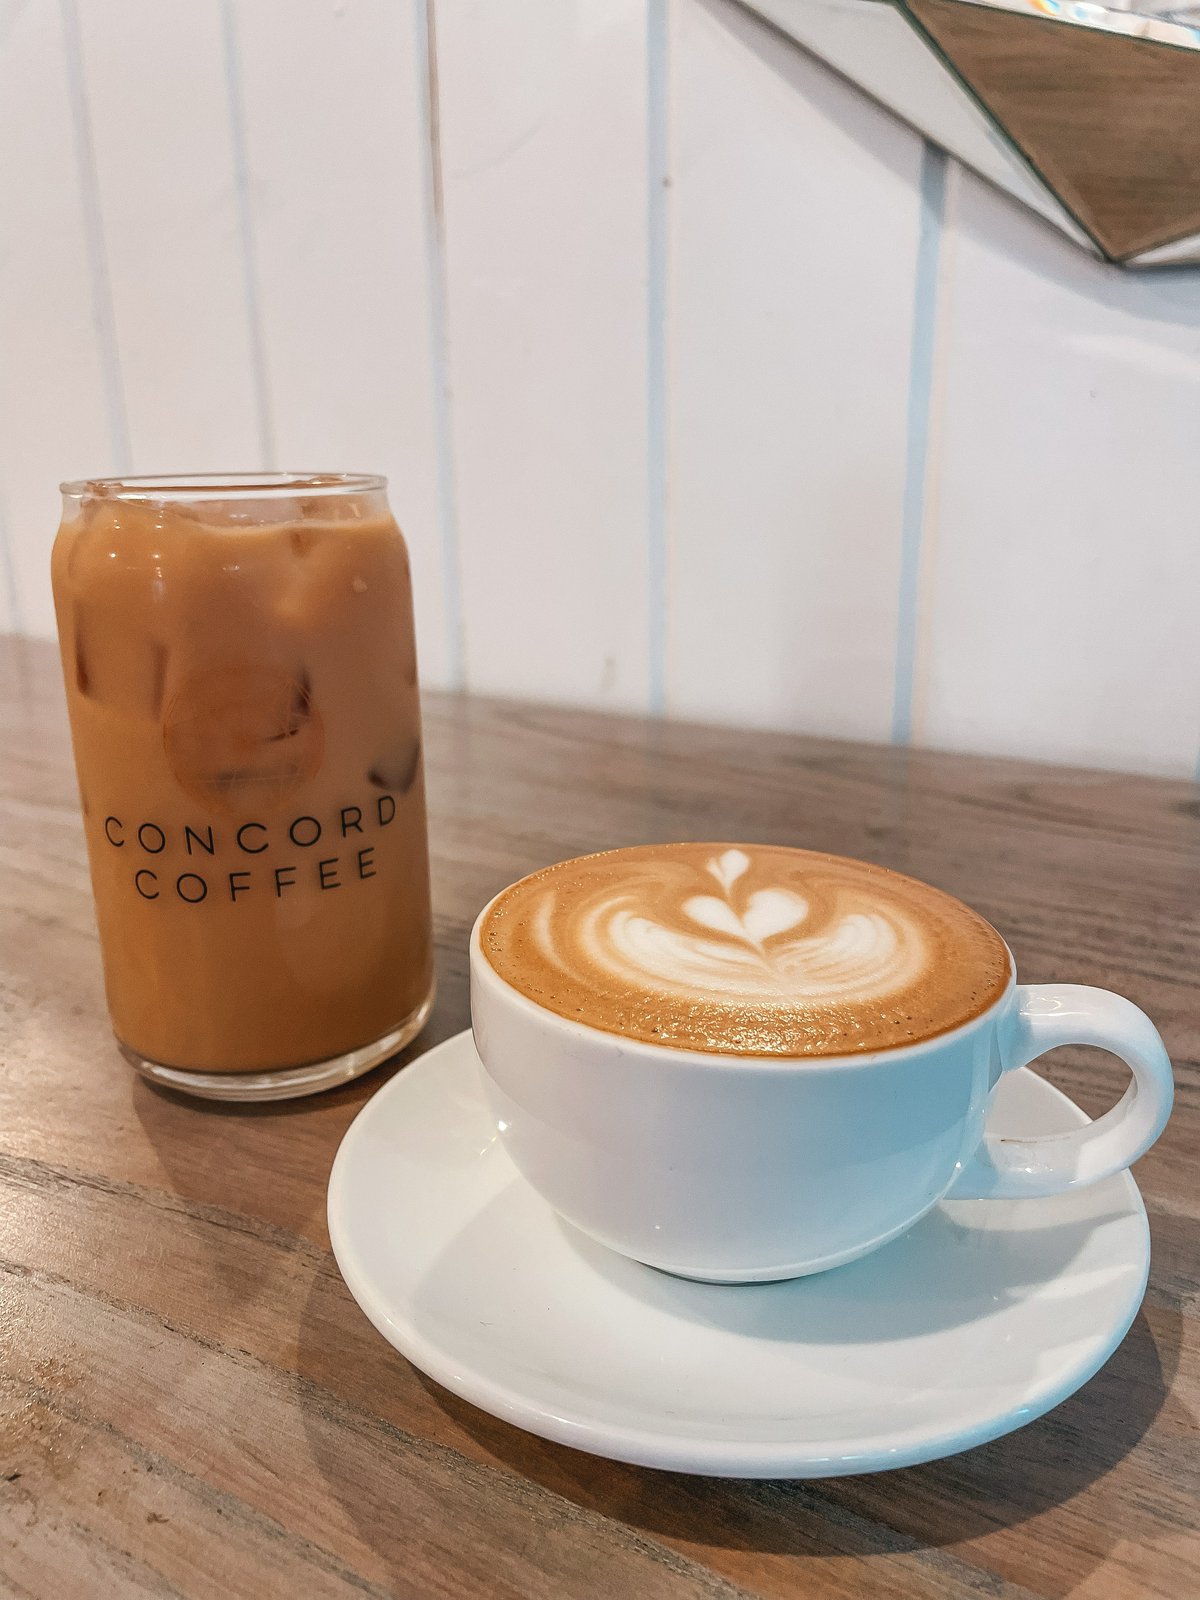 Cold brew and cappuccino from Concord Coffee in Lakeland